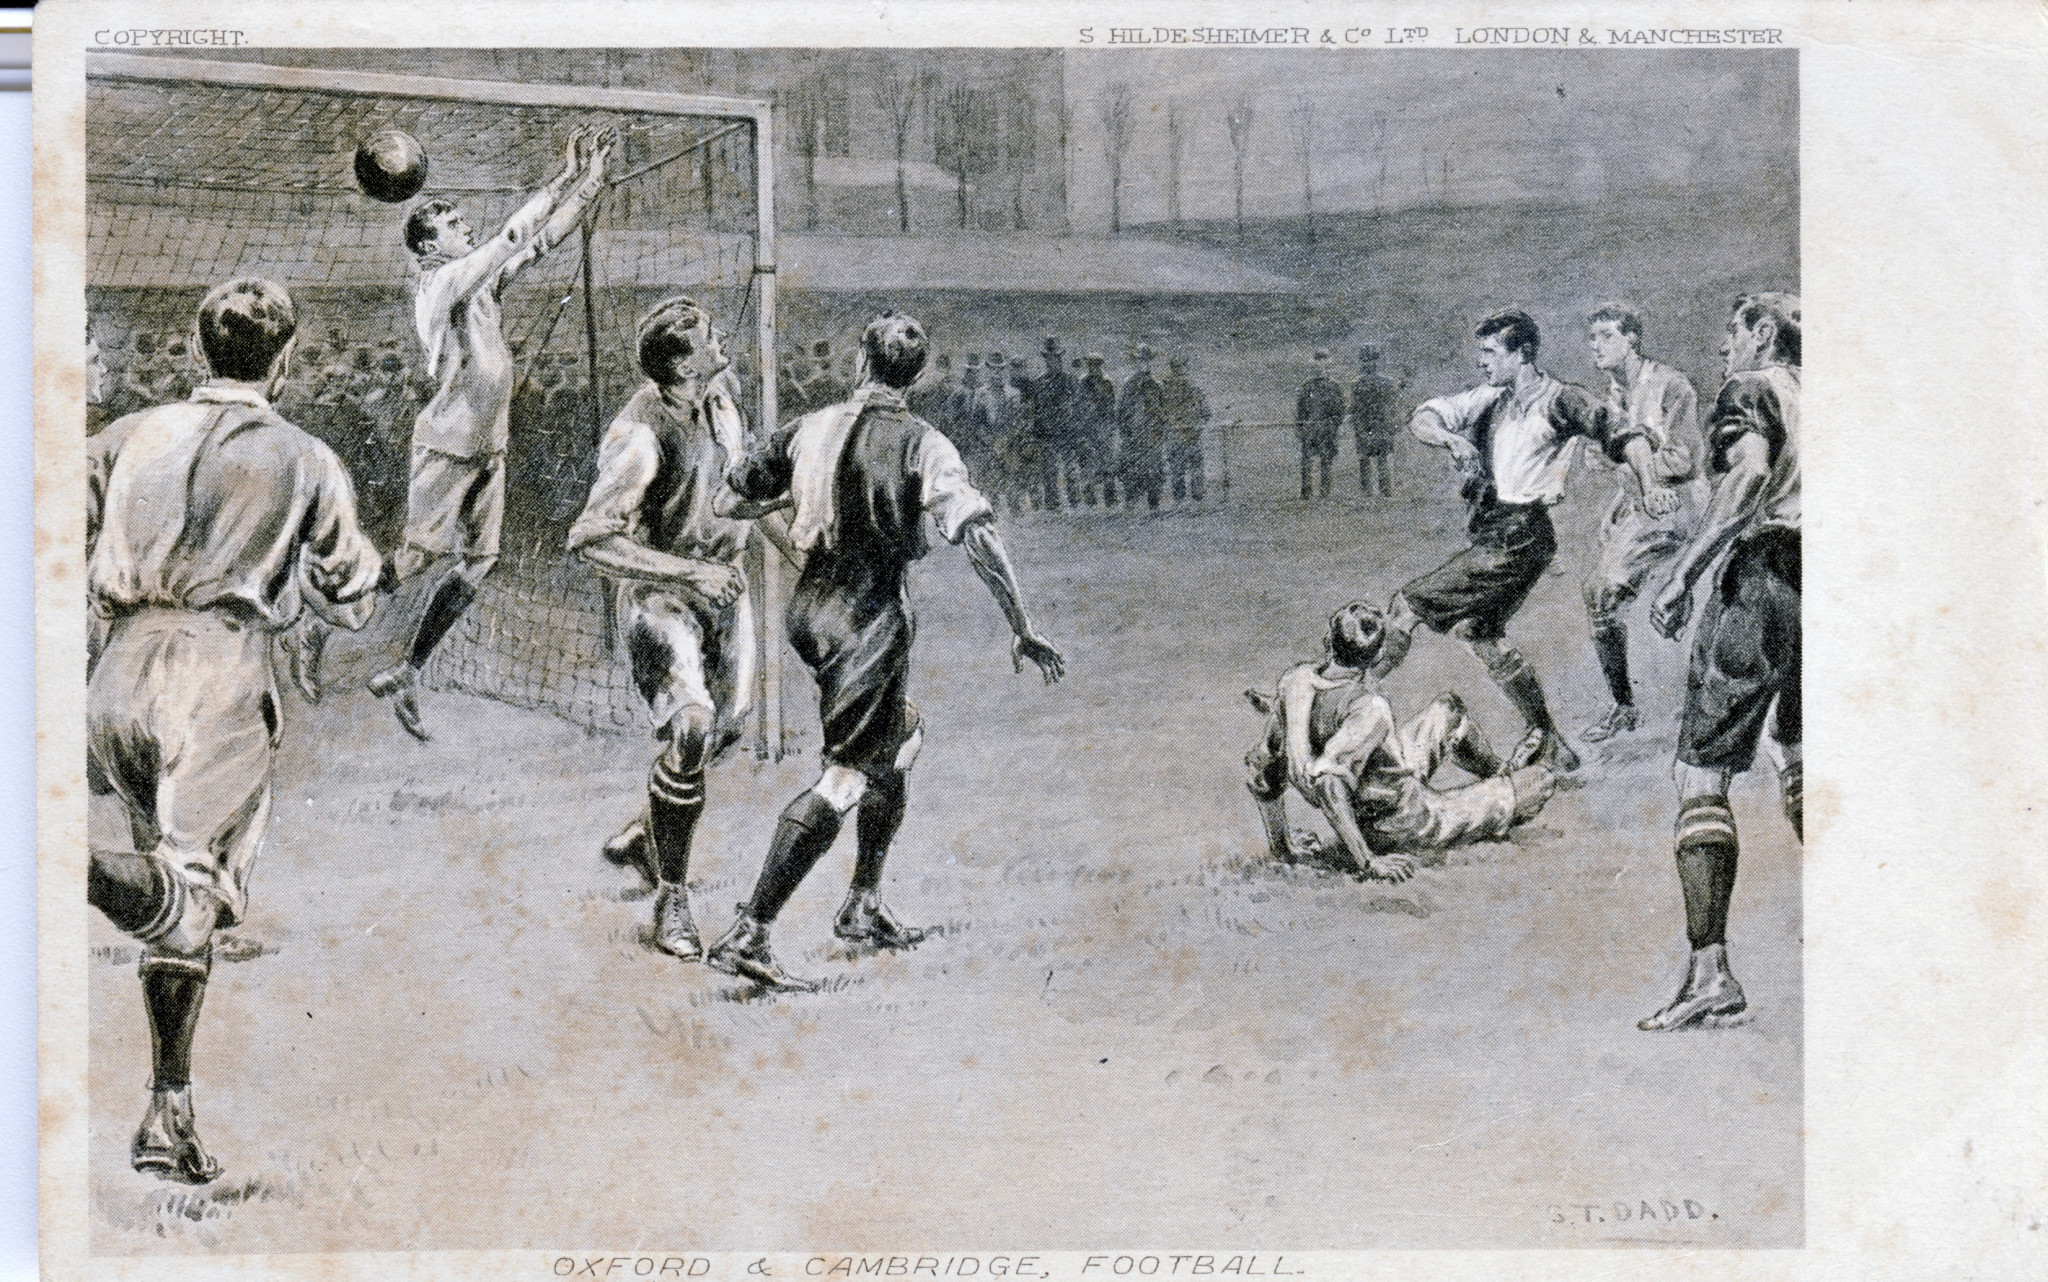 Oxford University reached the FA Cup final 150 years ago ©Hildesheimer